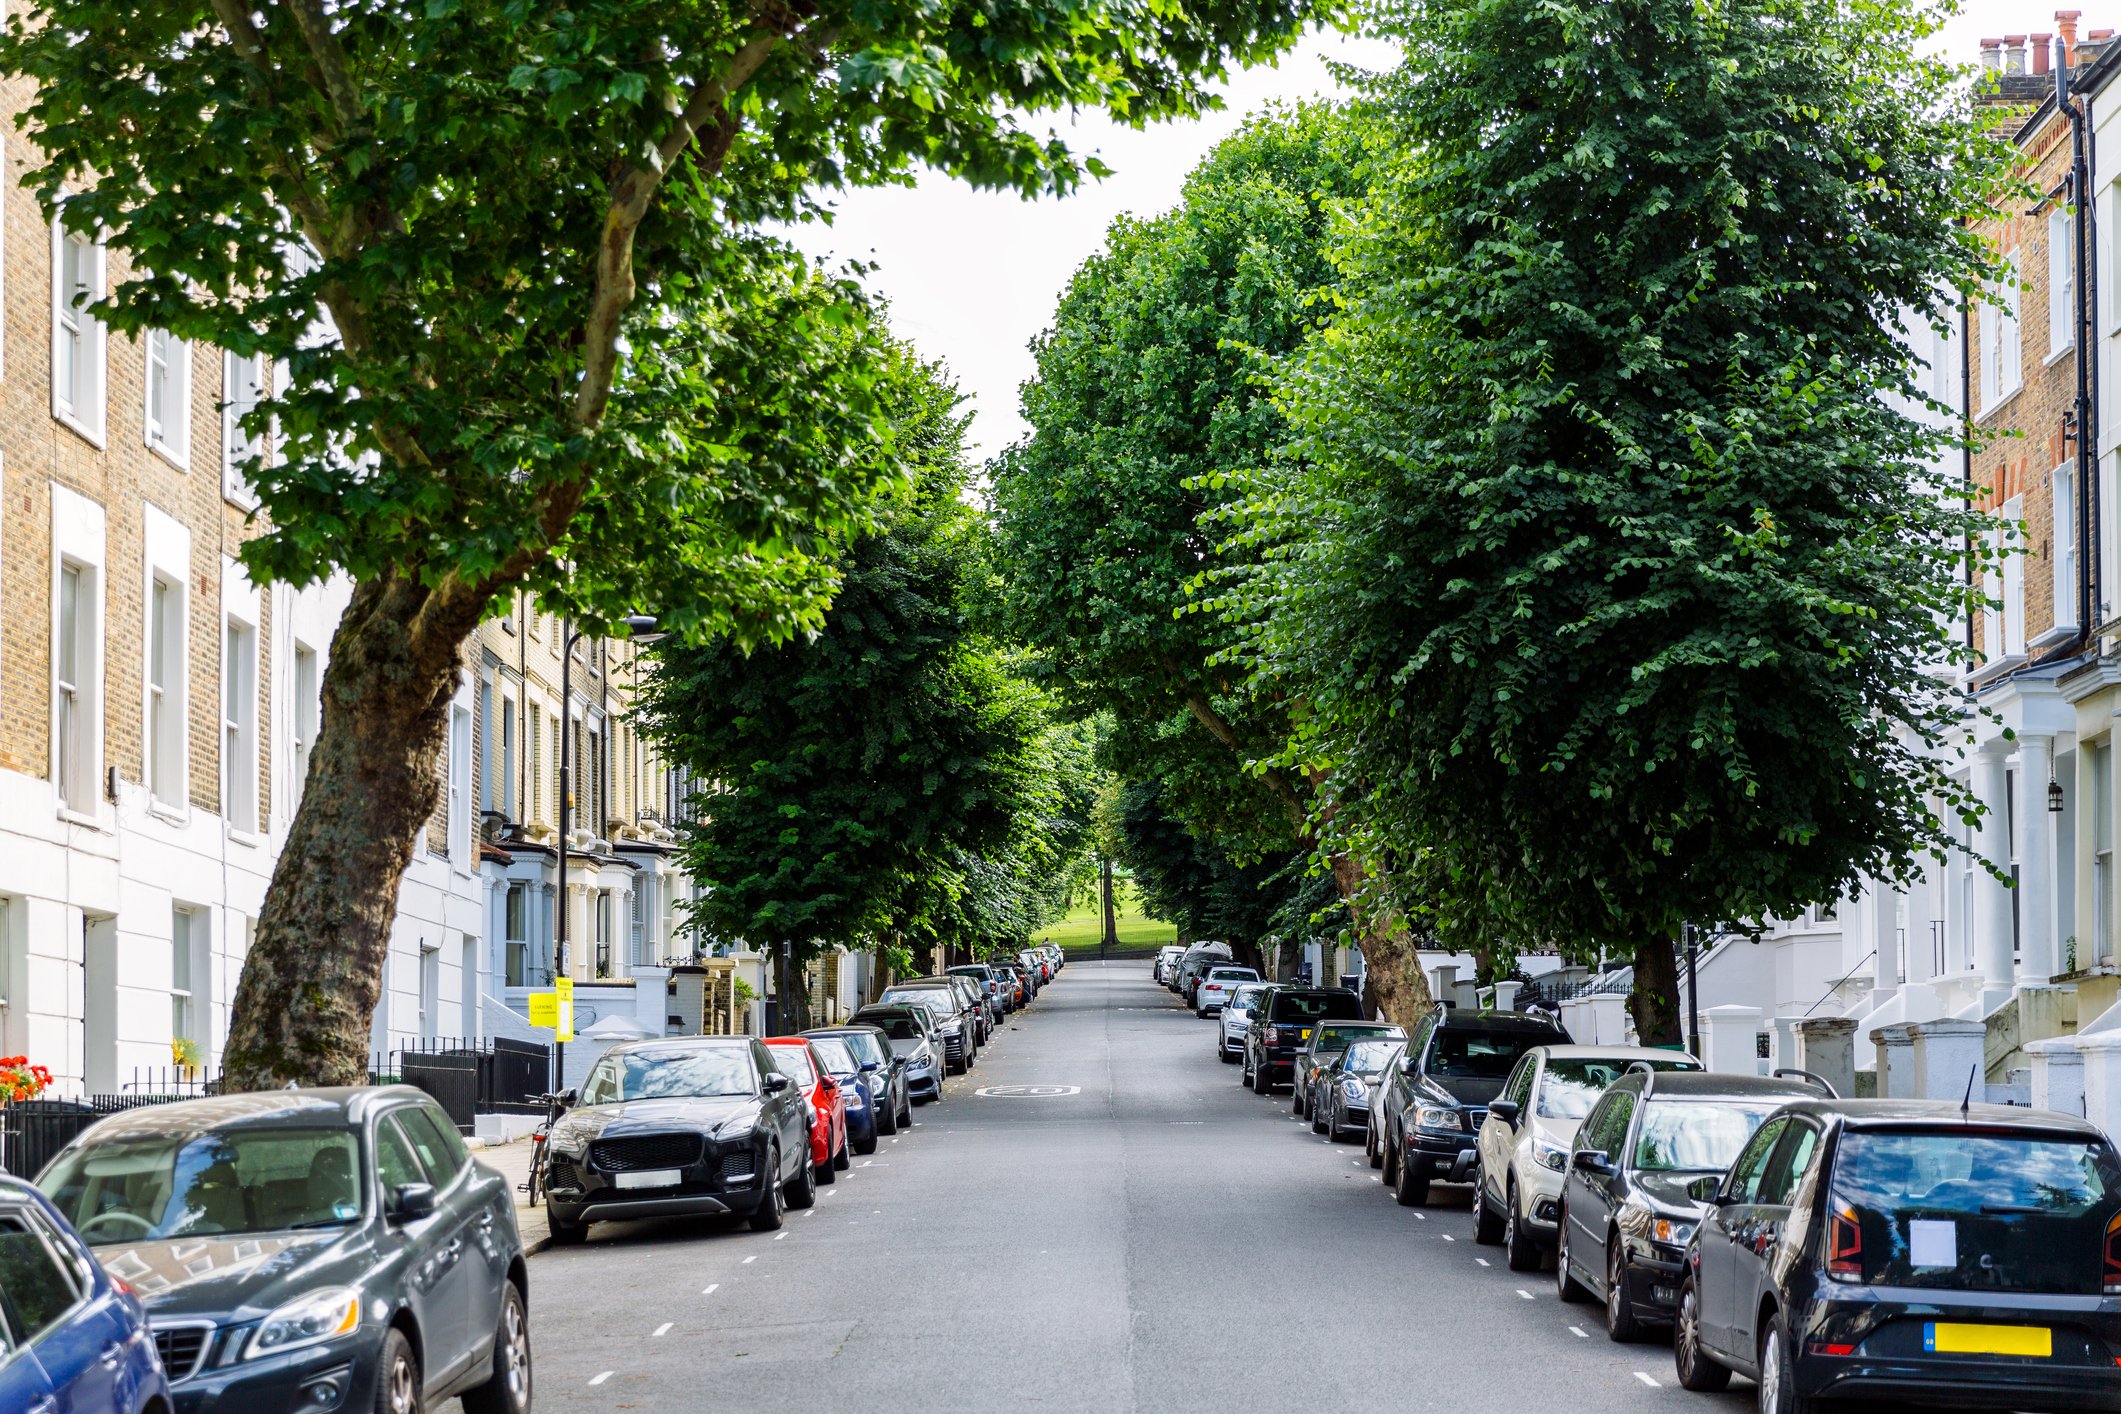 A picture of a street with trees and parked cars. | Photo: Getty Images